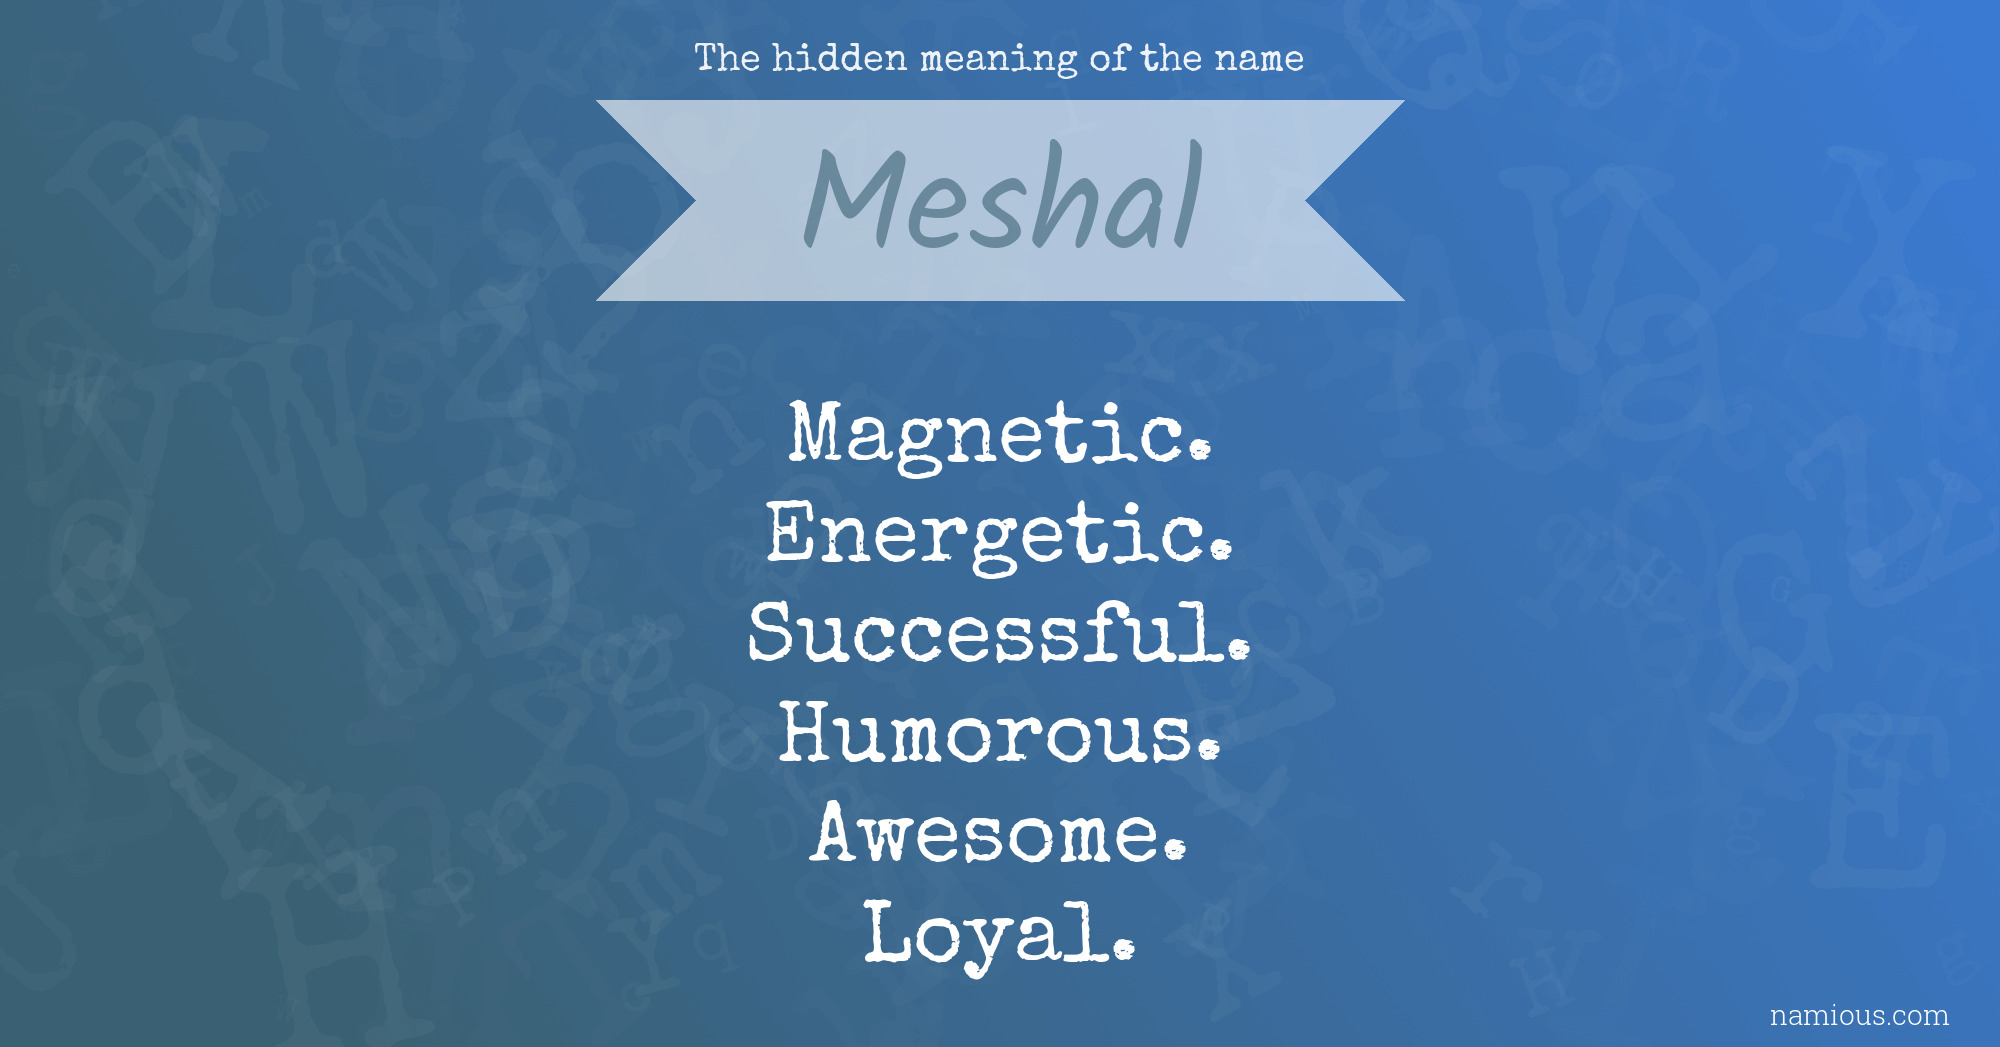 The hidden meaning of the name Meshal